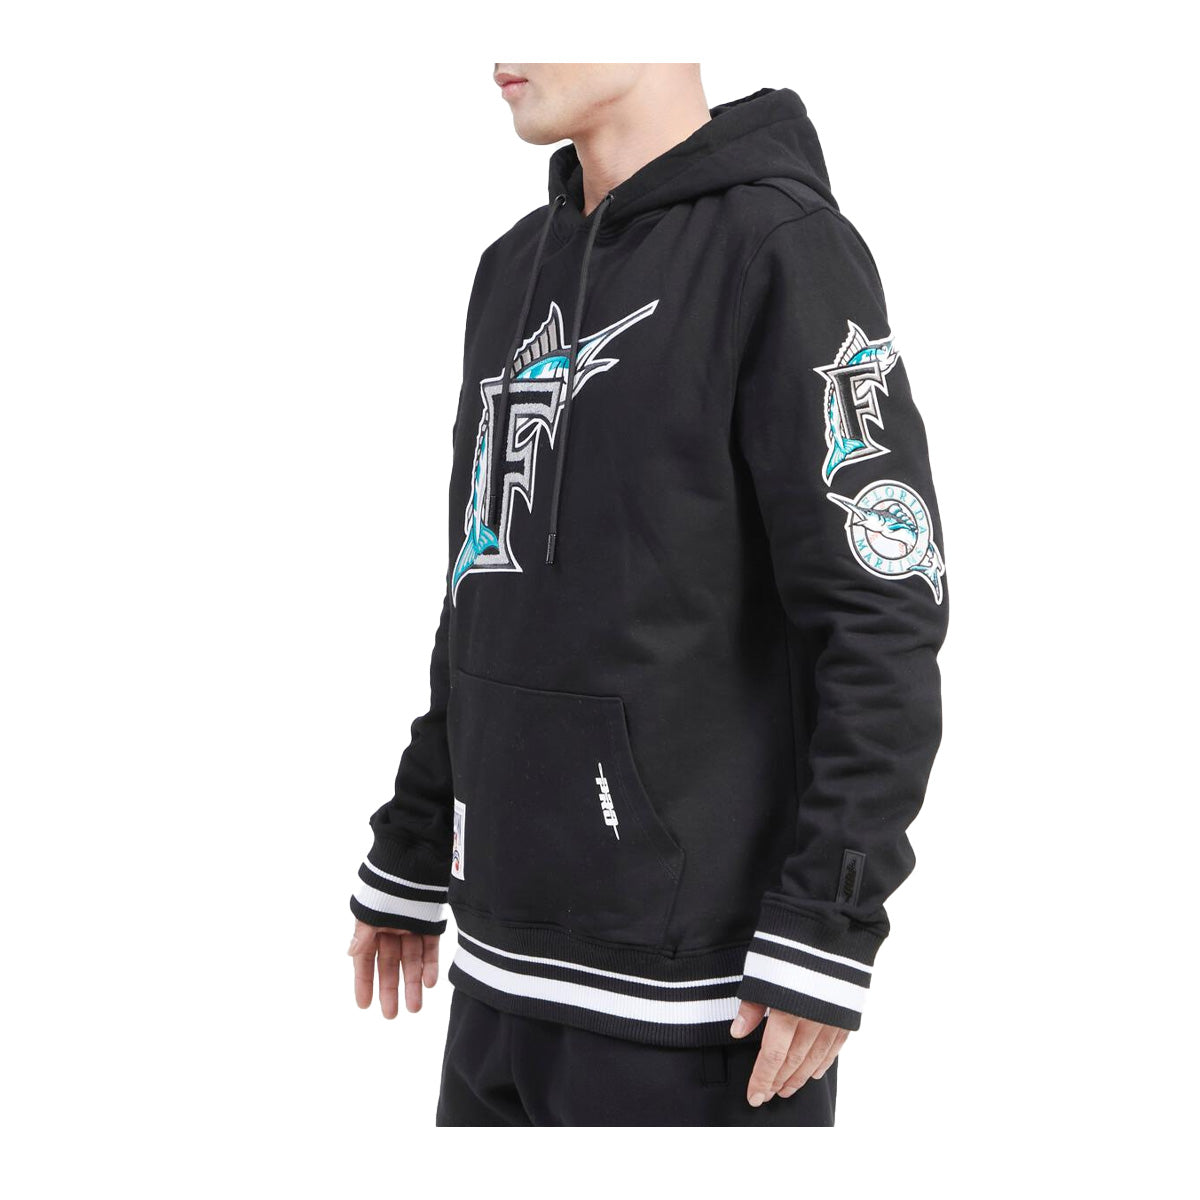 Men's Pro Standard Miami Marlins White Collection Pullover Hoodie